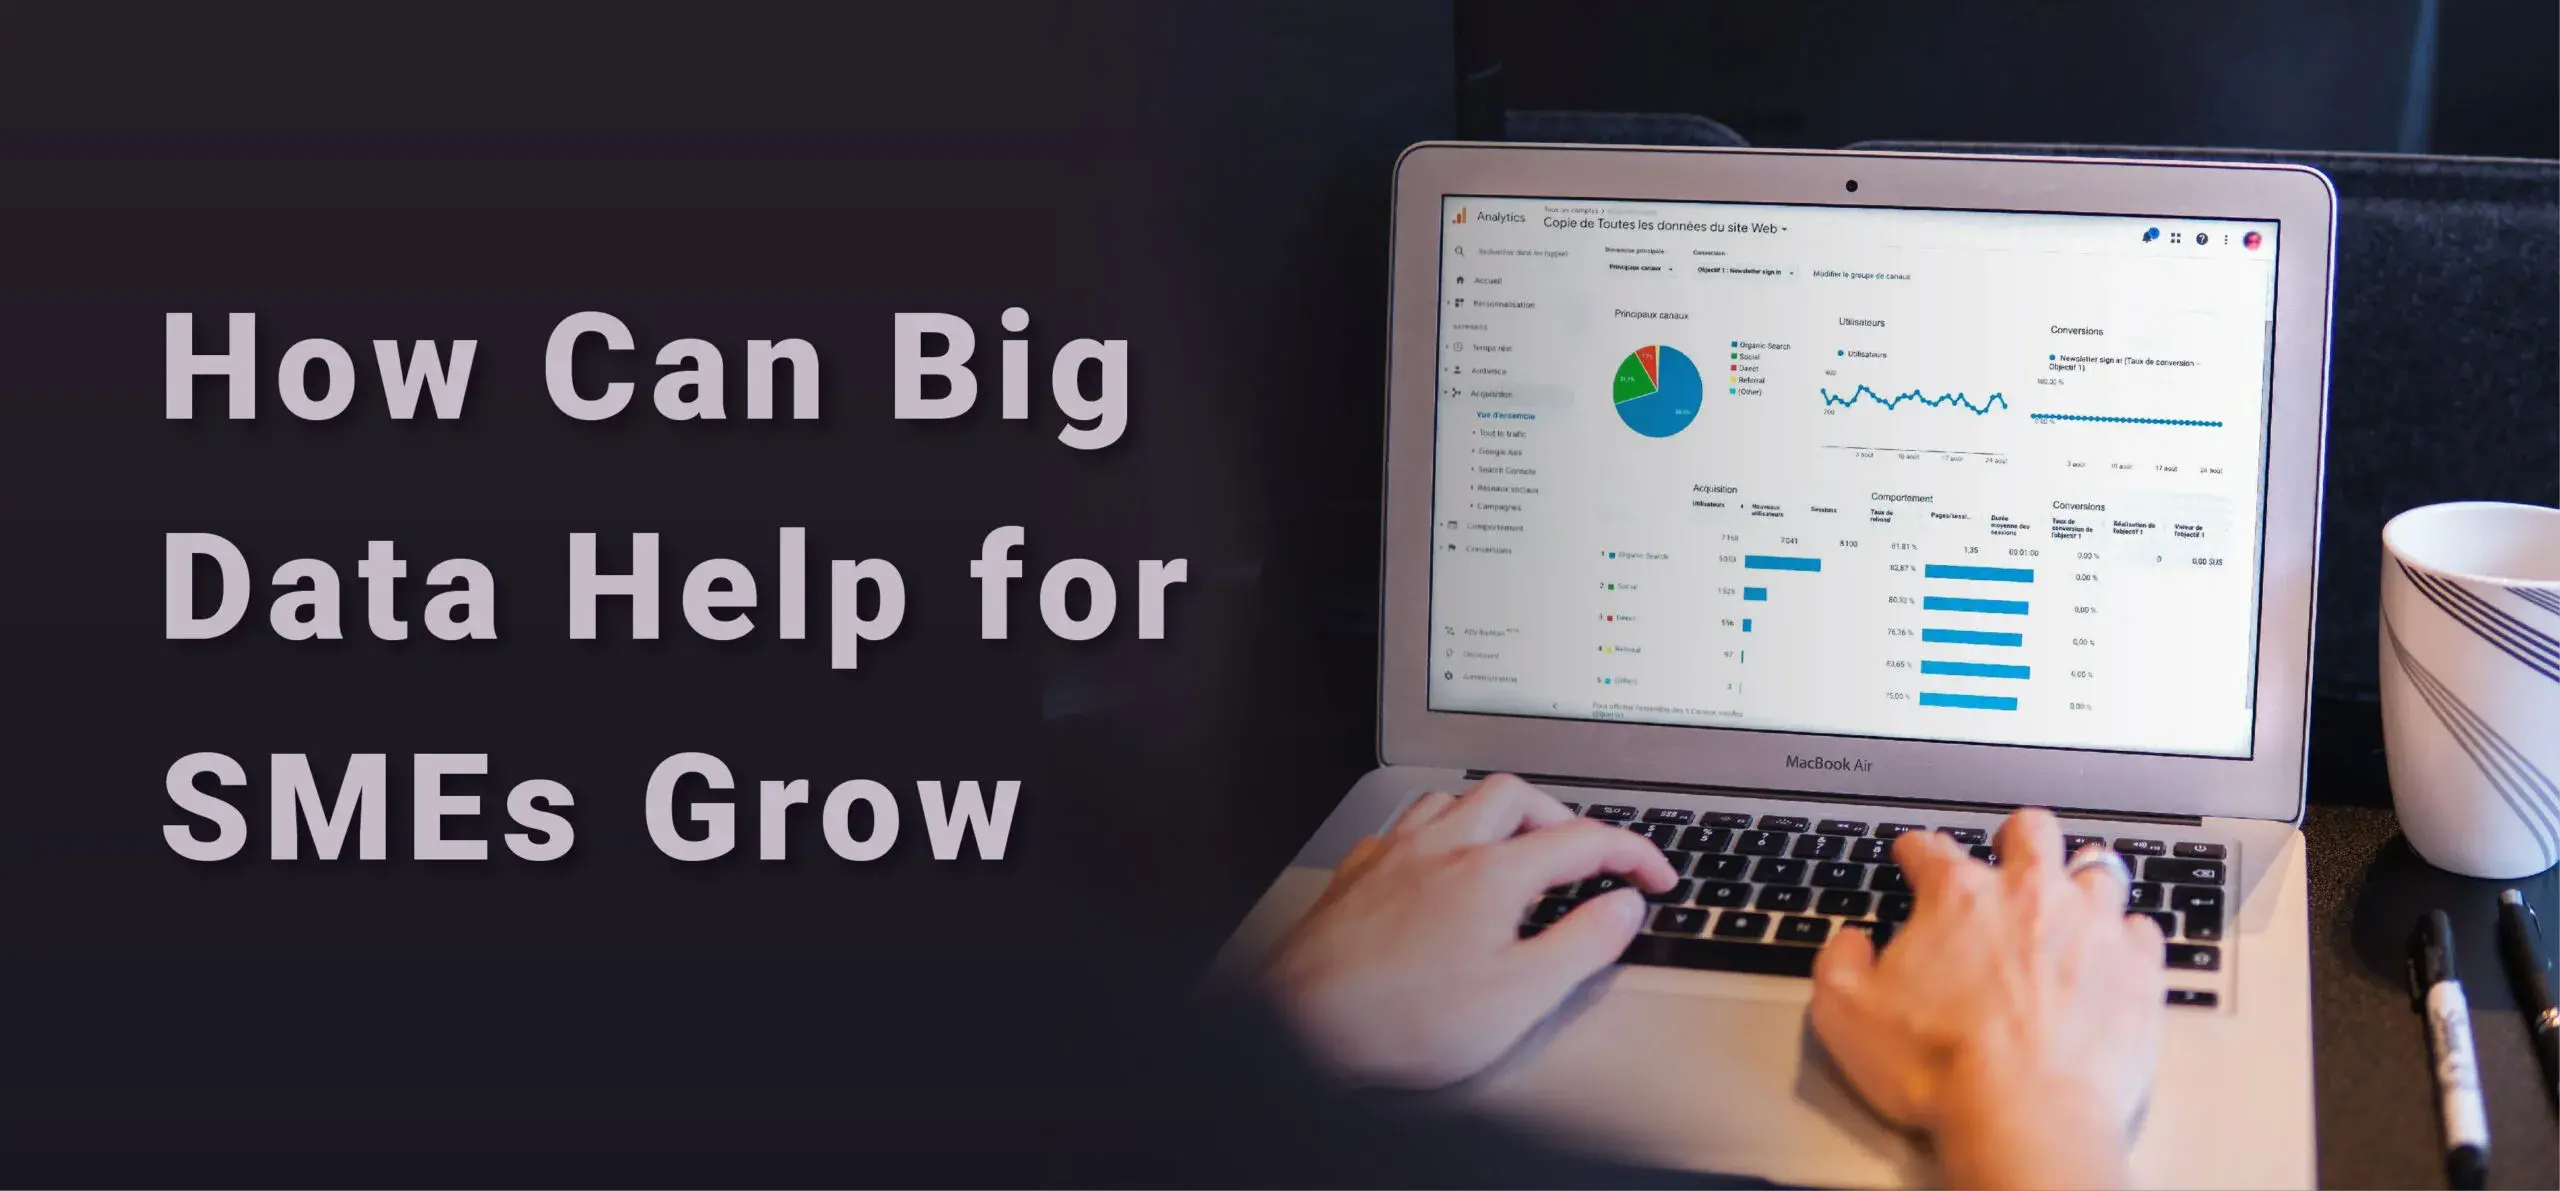 How Can Big Data Help SMEs Grow?